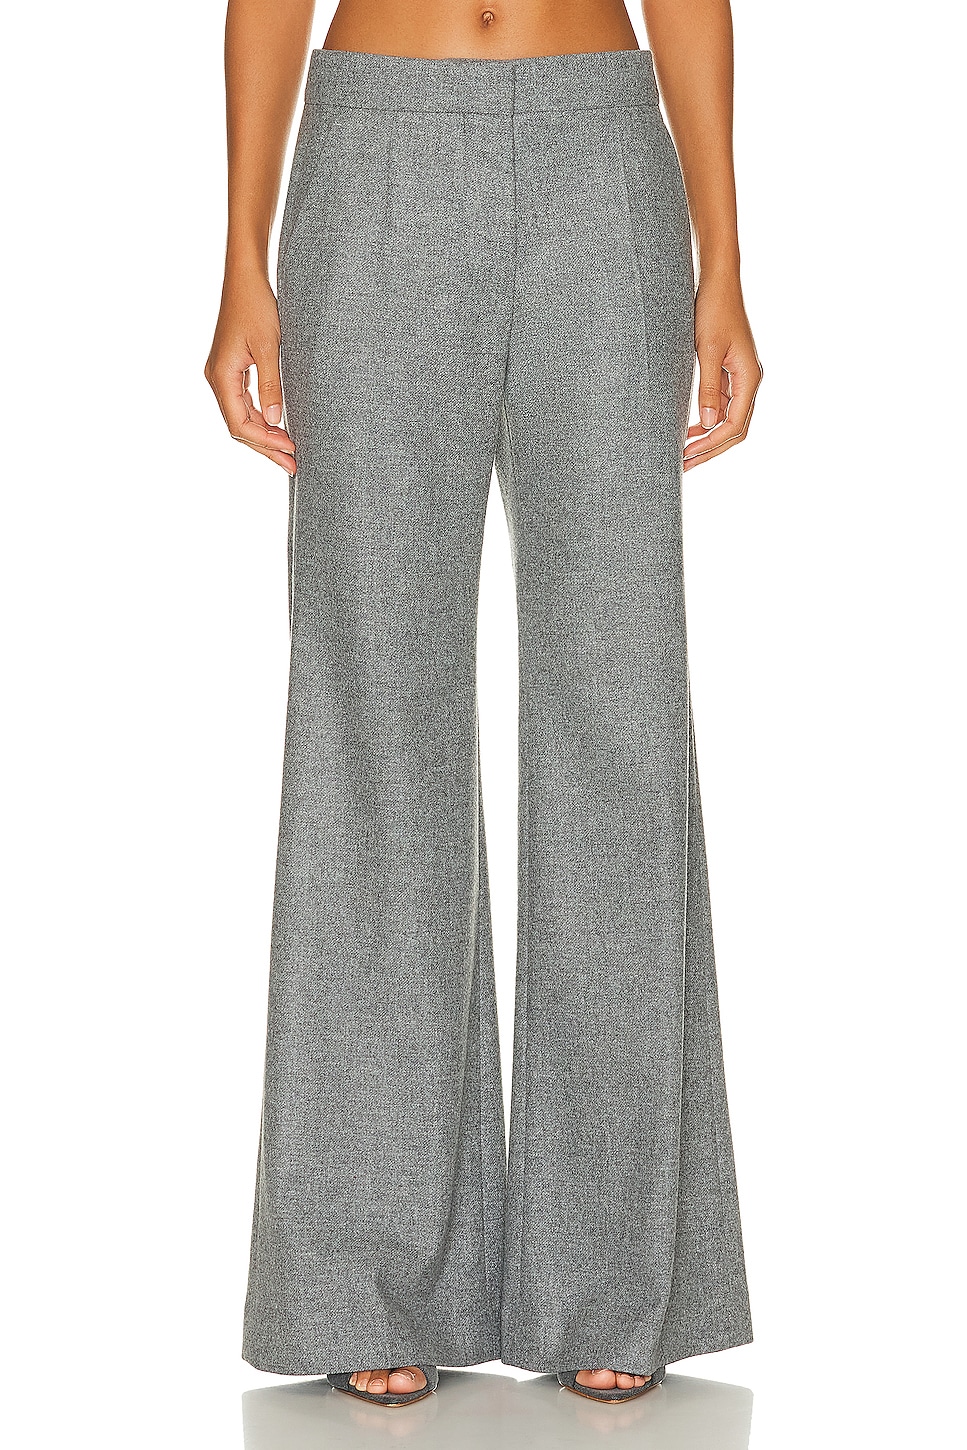 Image 1 of Givenchy Tailored Flare Pant in Grey